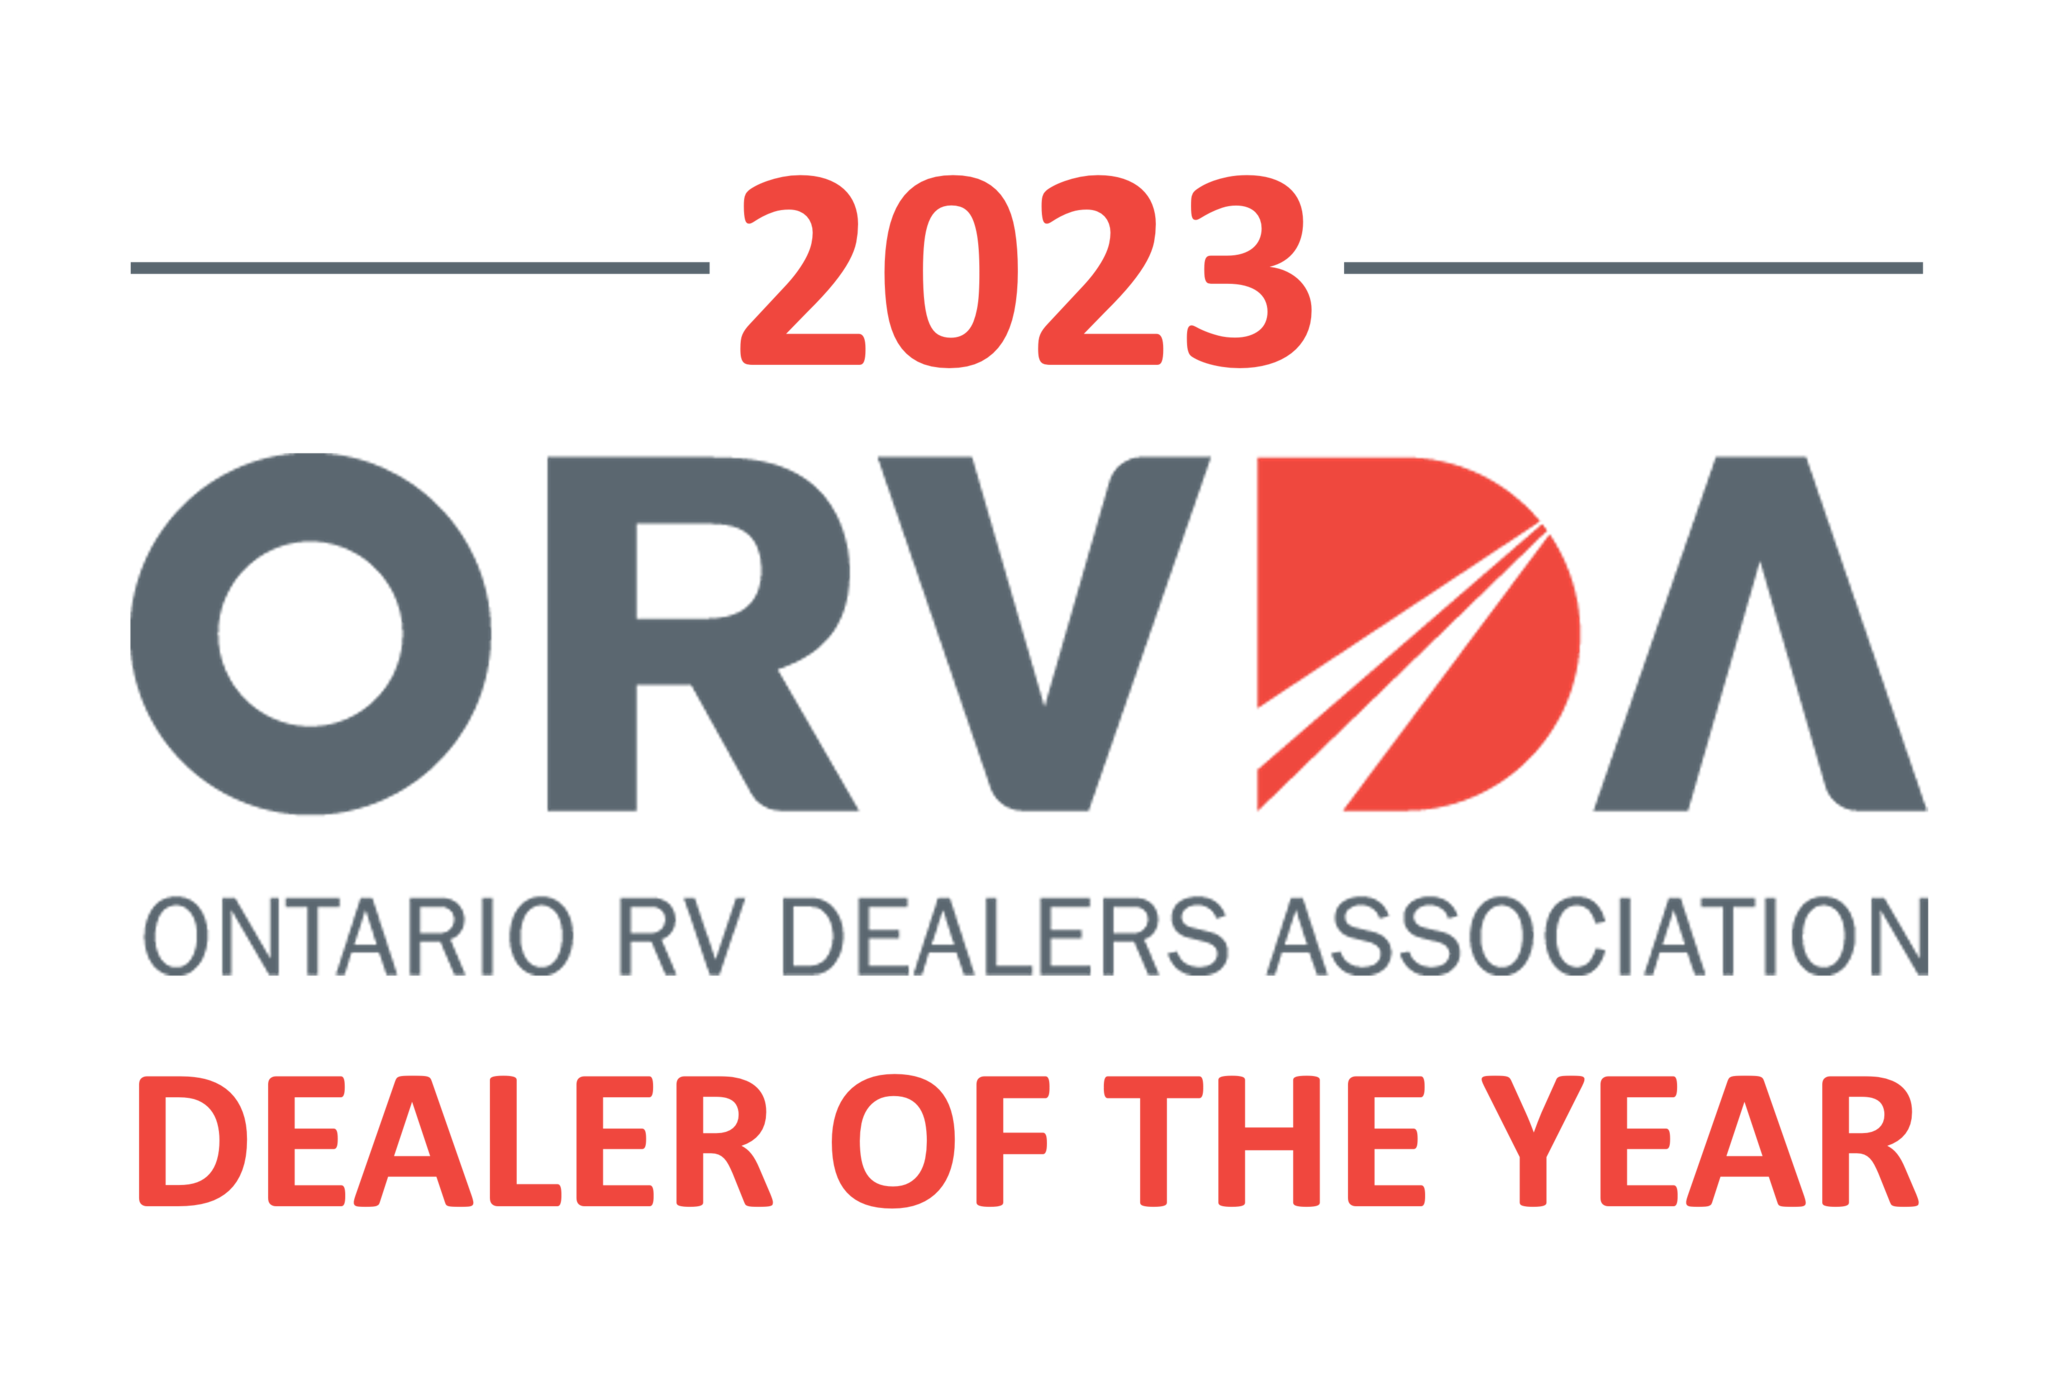 2023 Dealer of the year